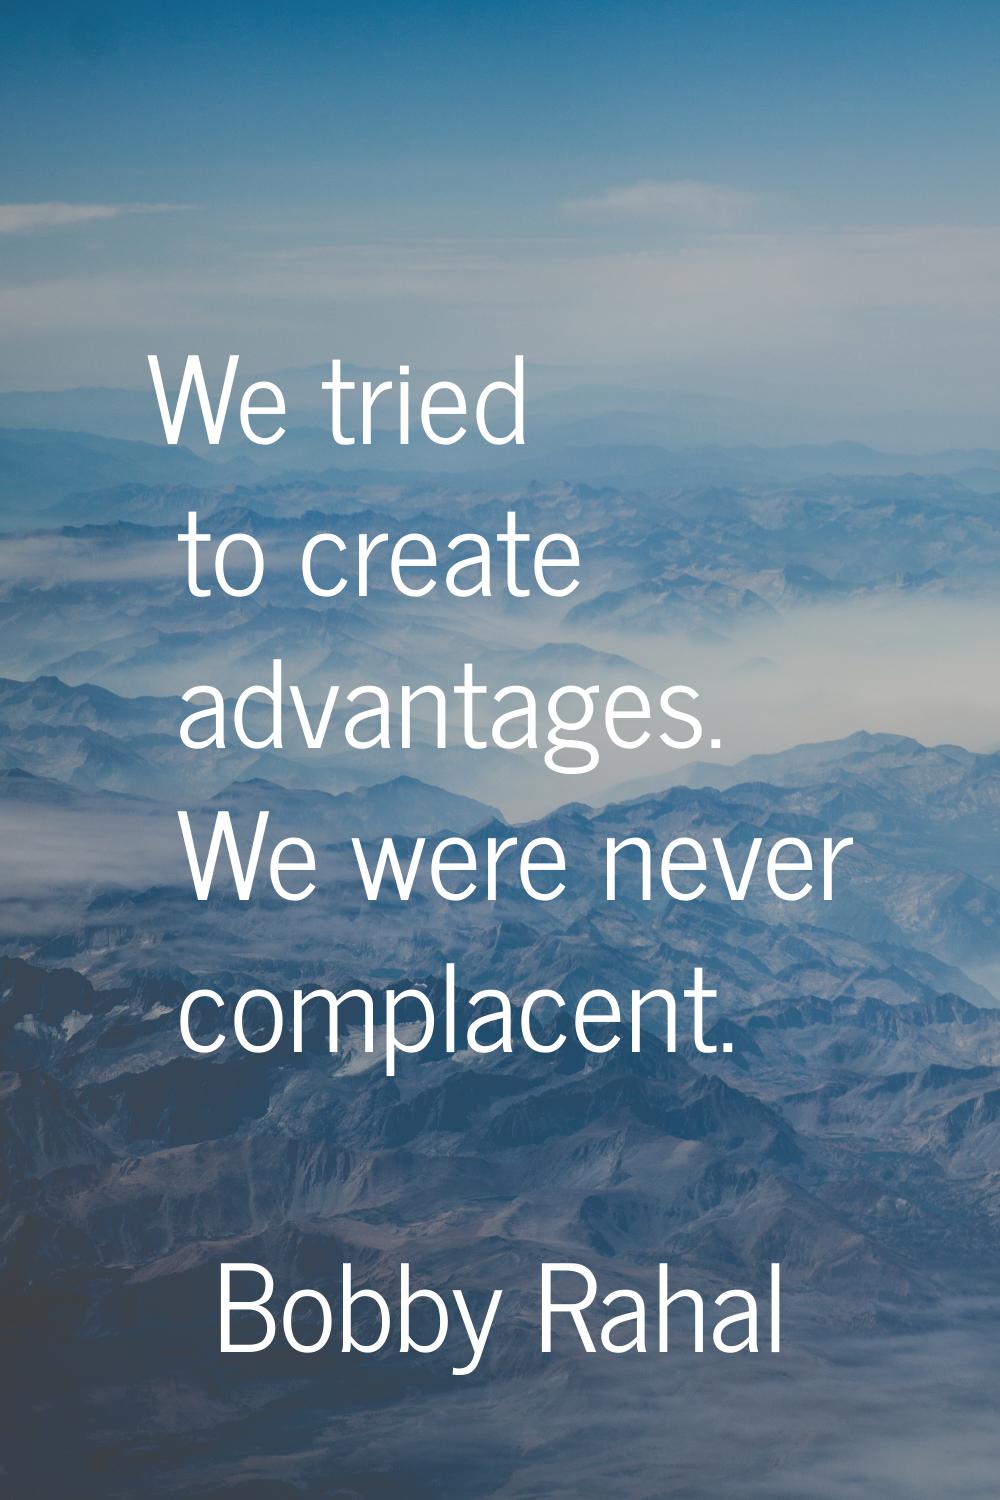 We tried to create advantages. We were never complacent.